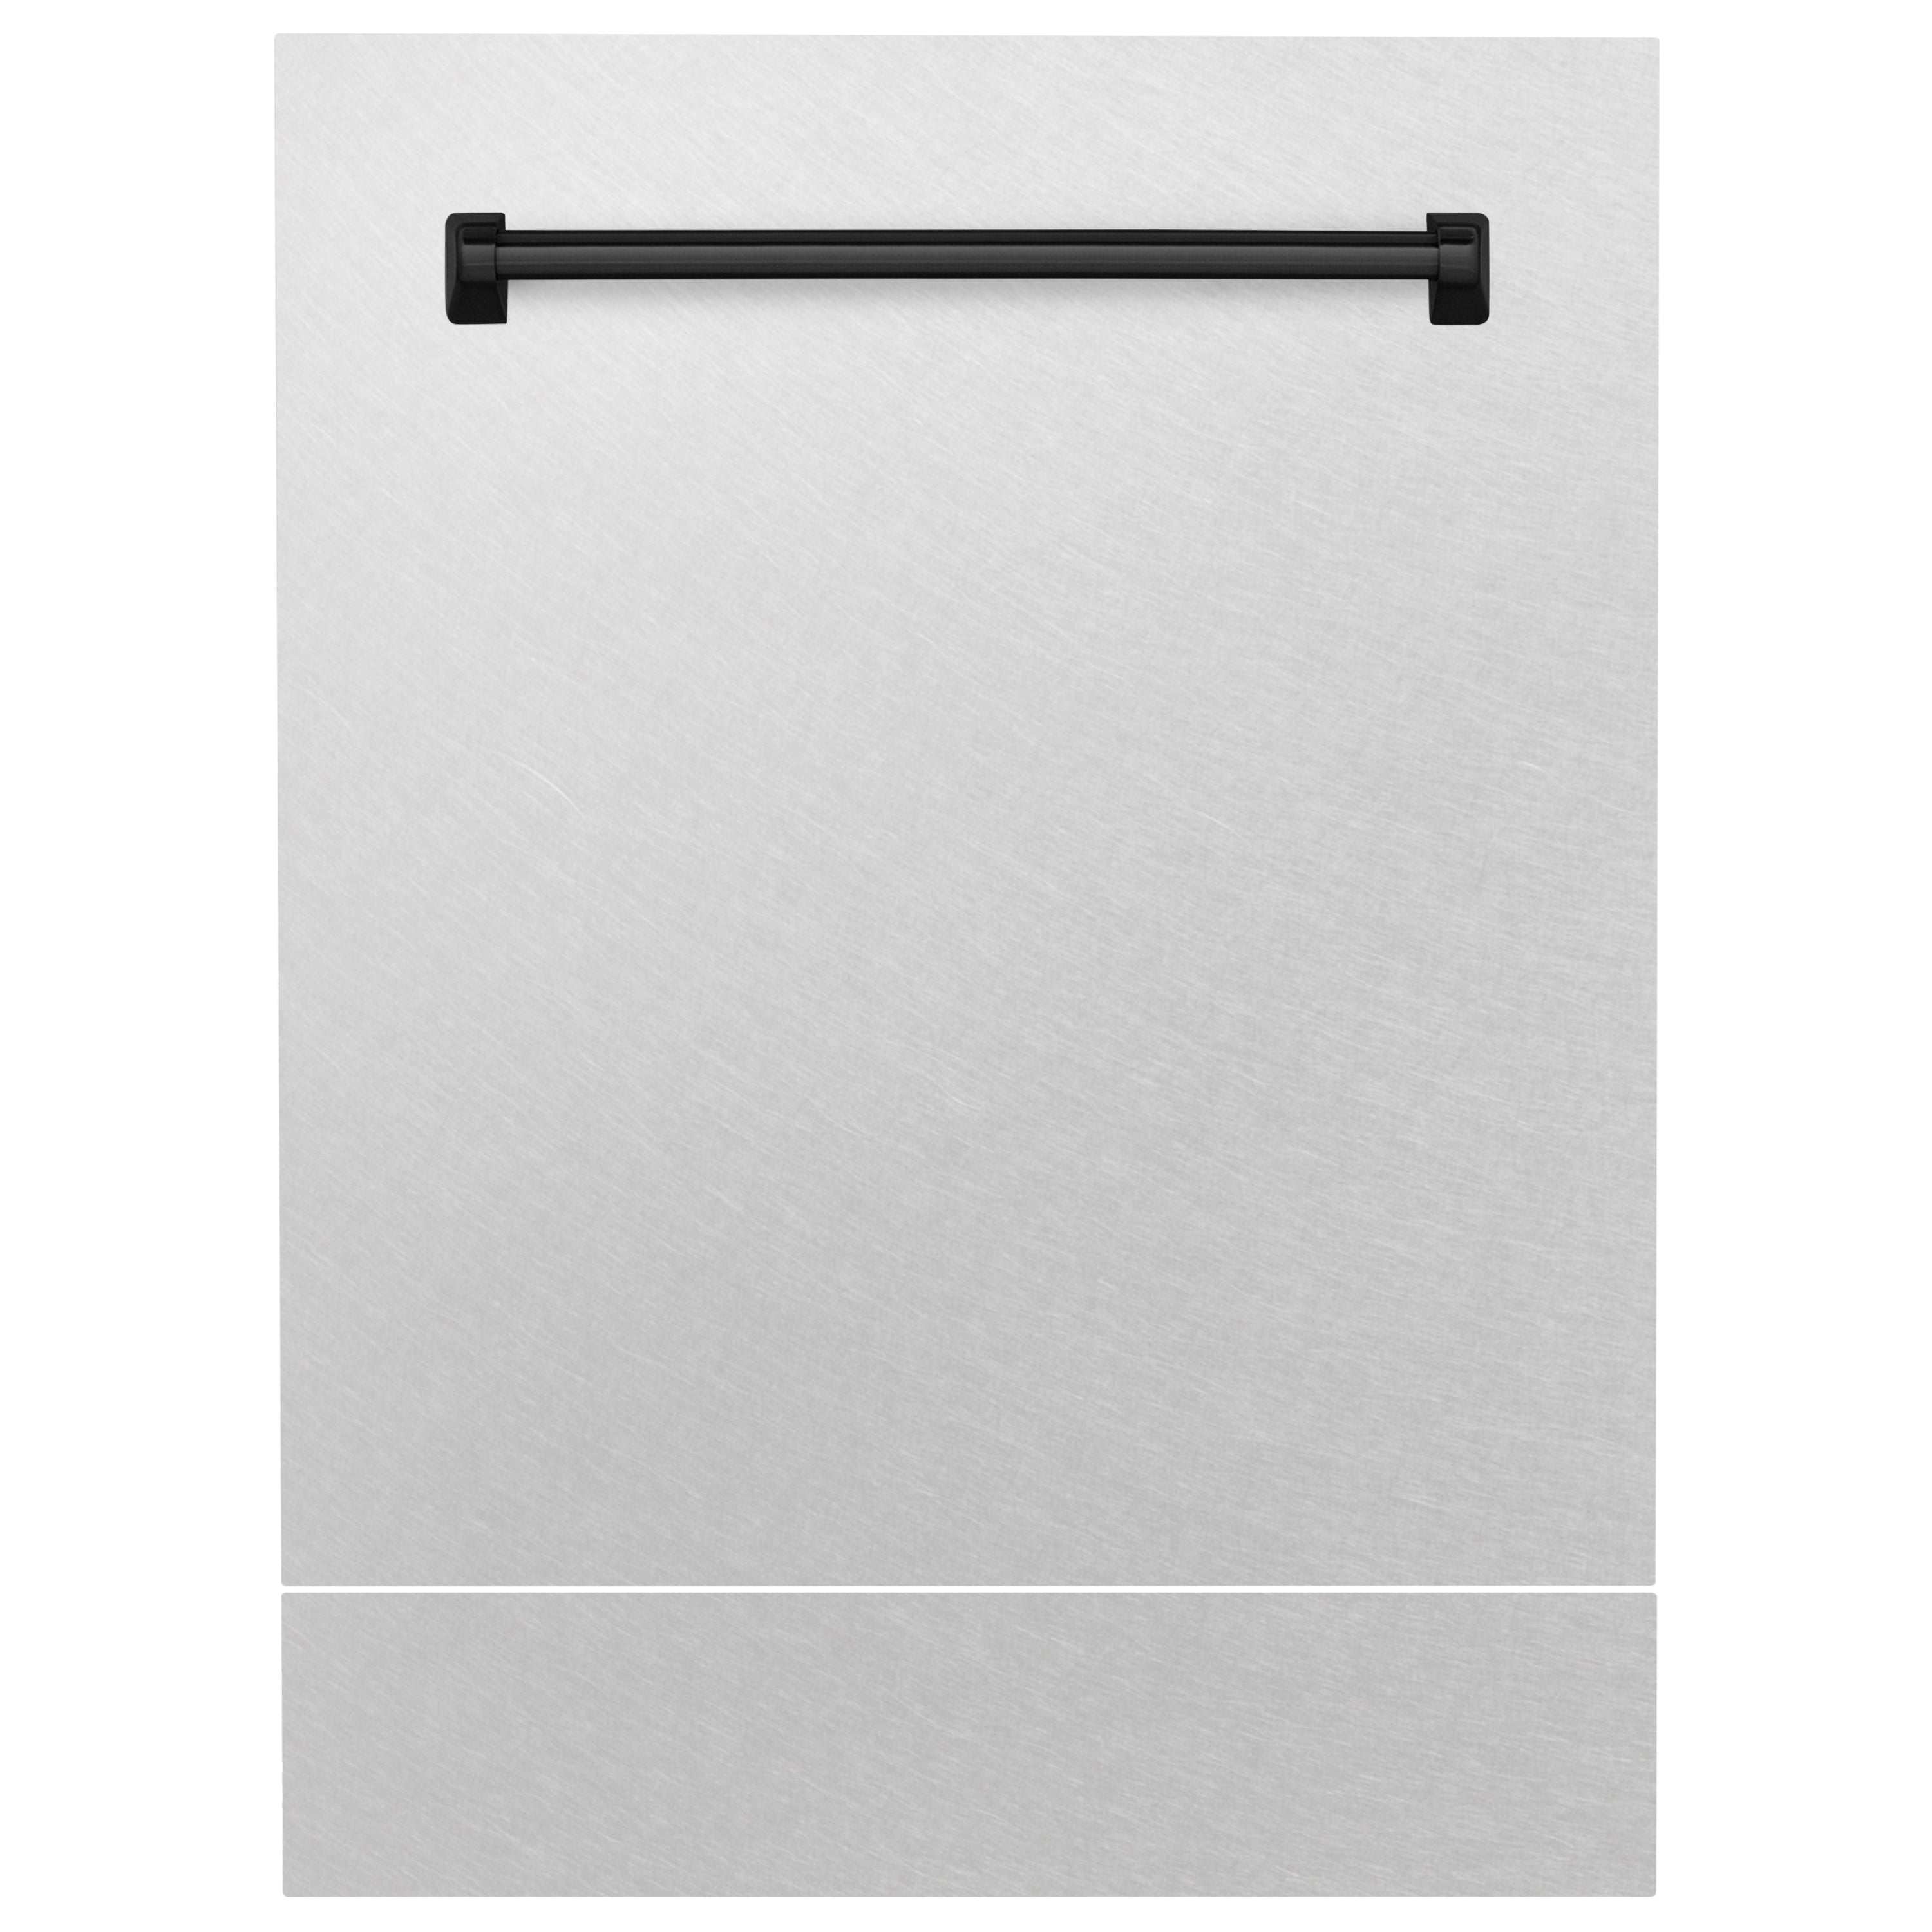 ZLINE 24" Autograph Edition Tallac Dishwasher Panel in Fingerprint Resistant Stainless Steel with Matte Black Handle (DPVZ-SN-24-MB)